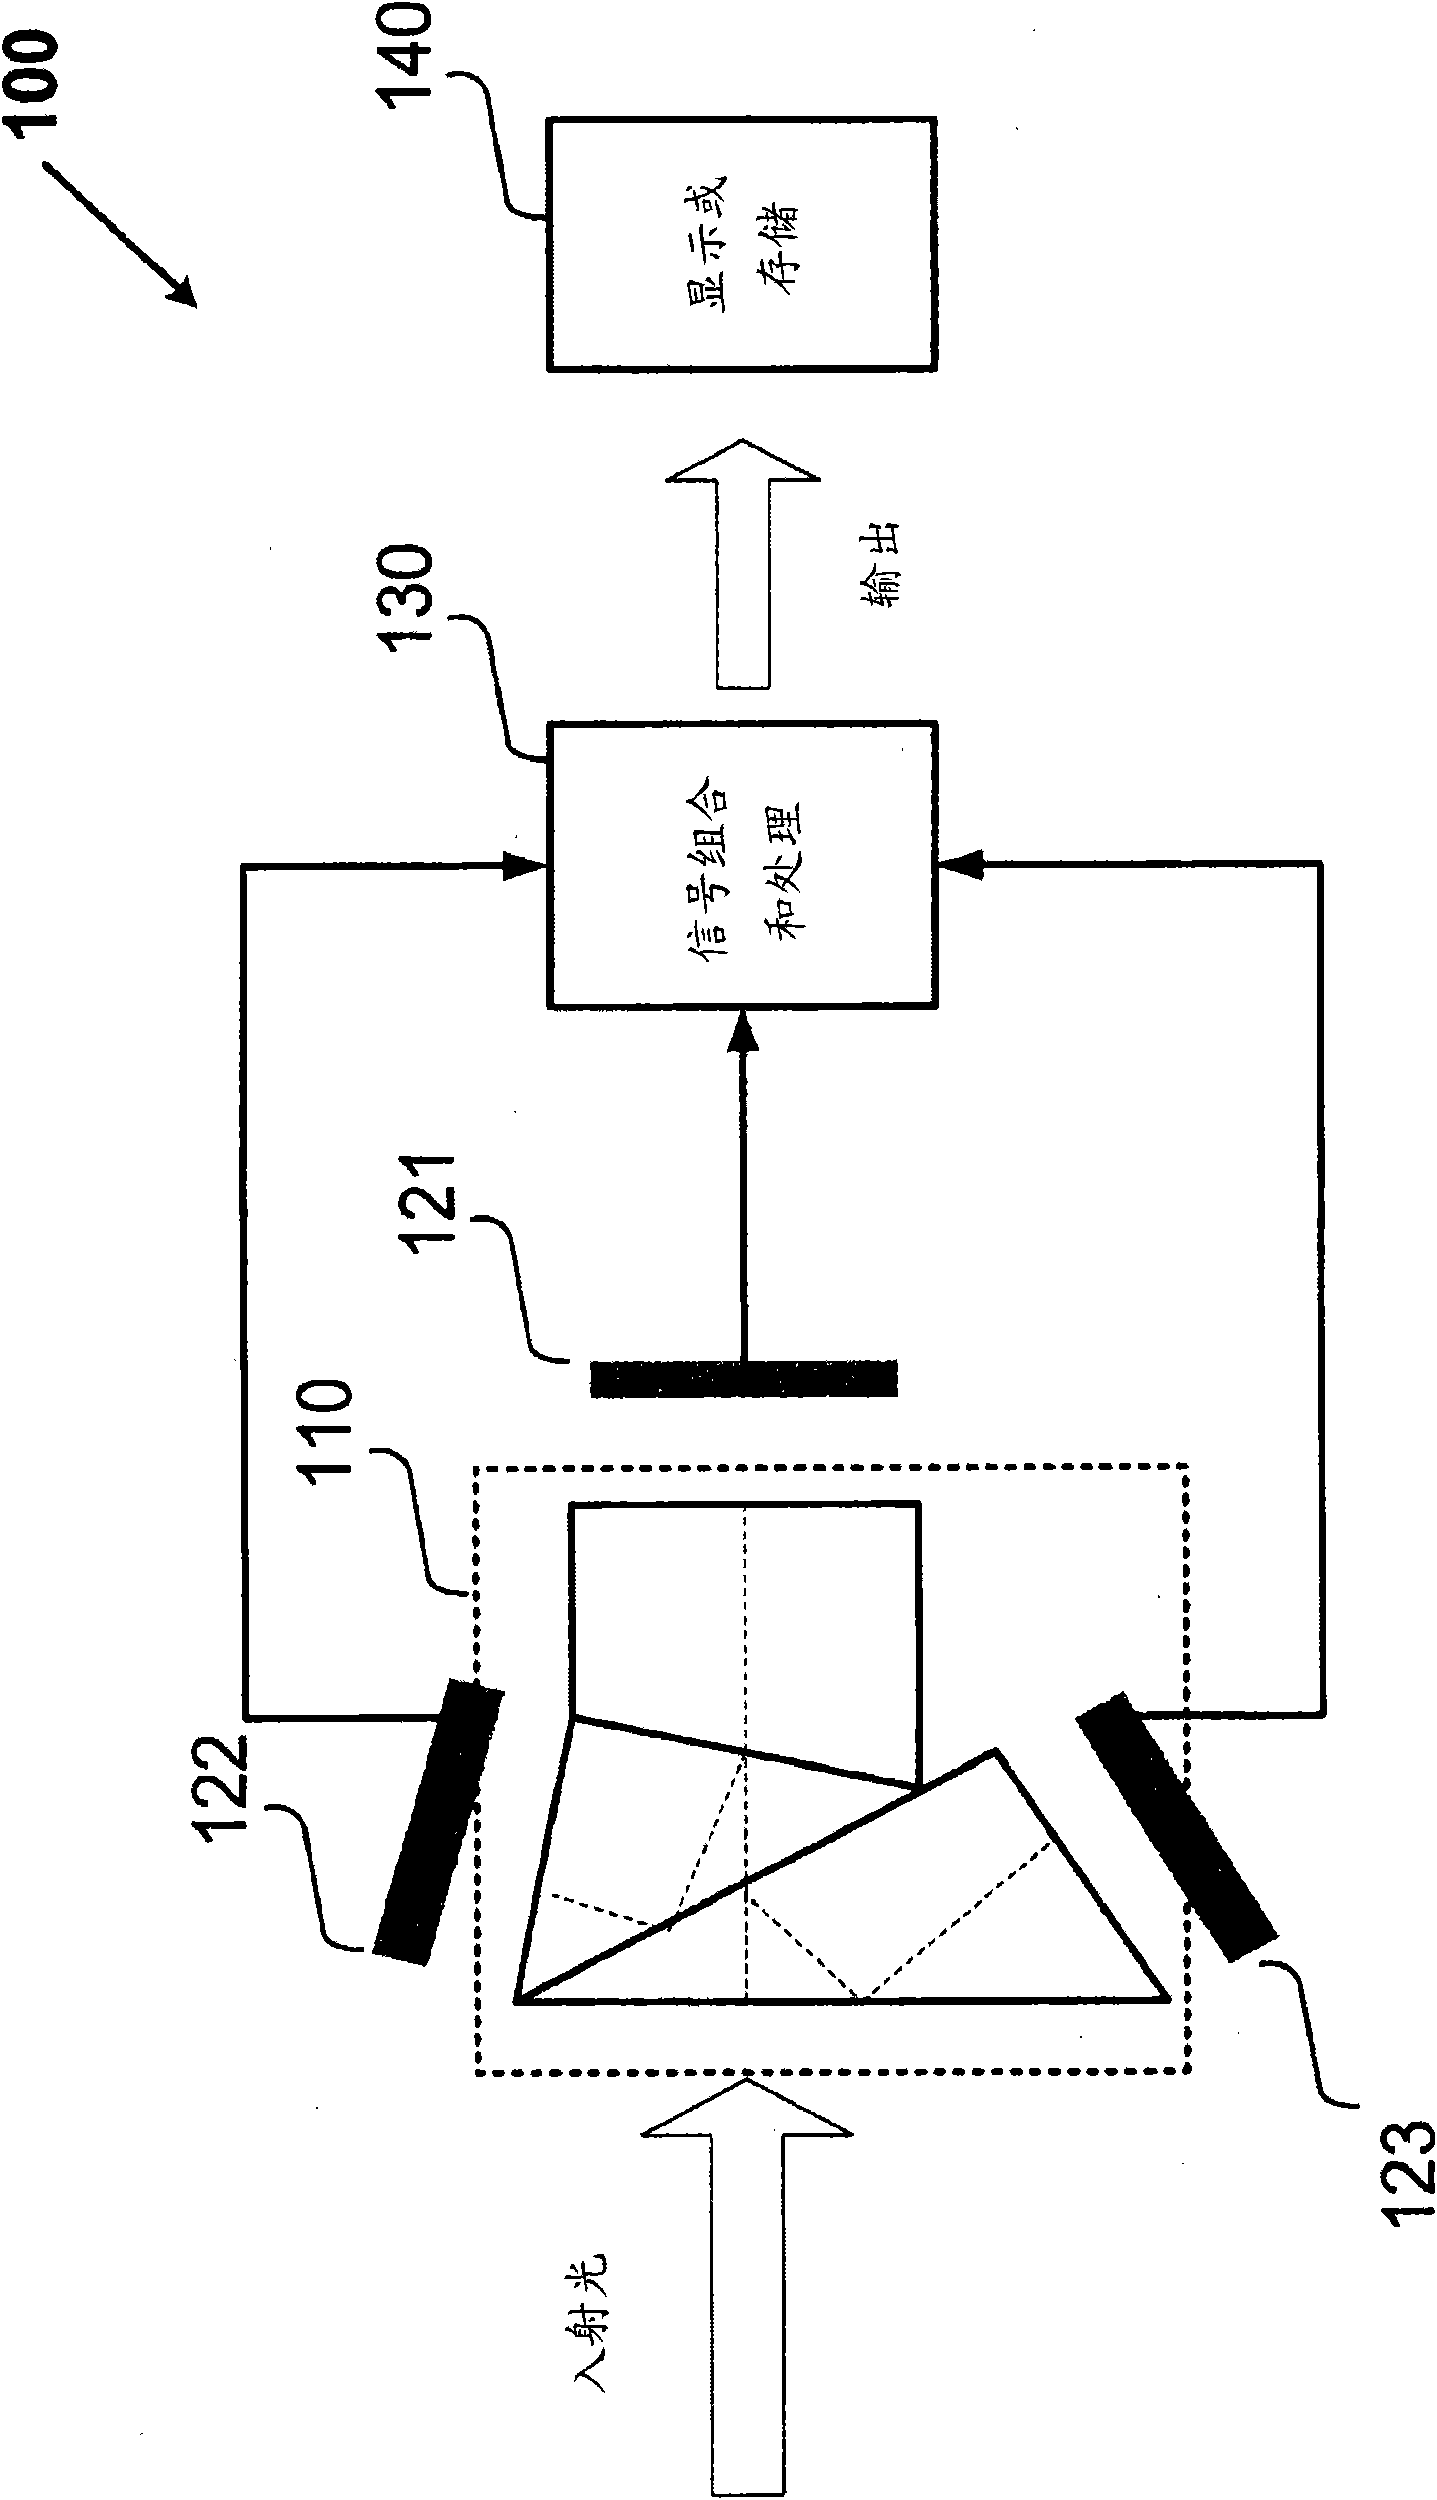 Camera system with multiple pixel arrays on chip